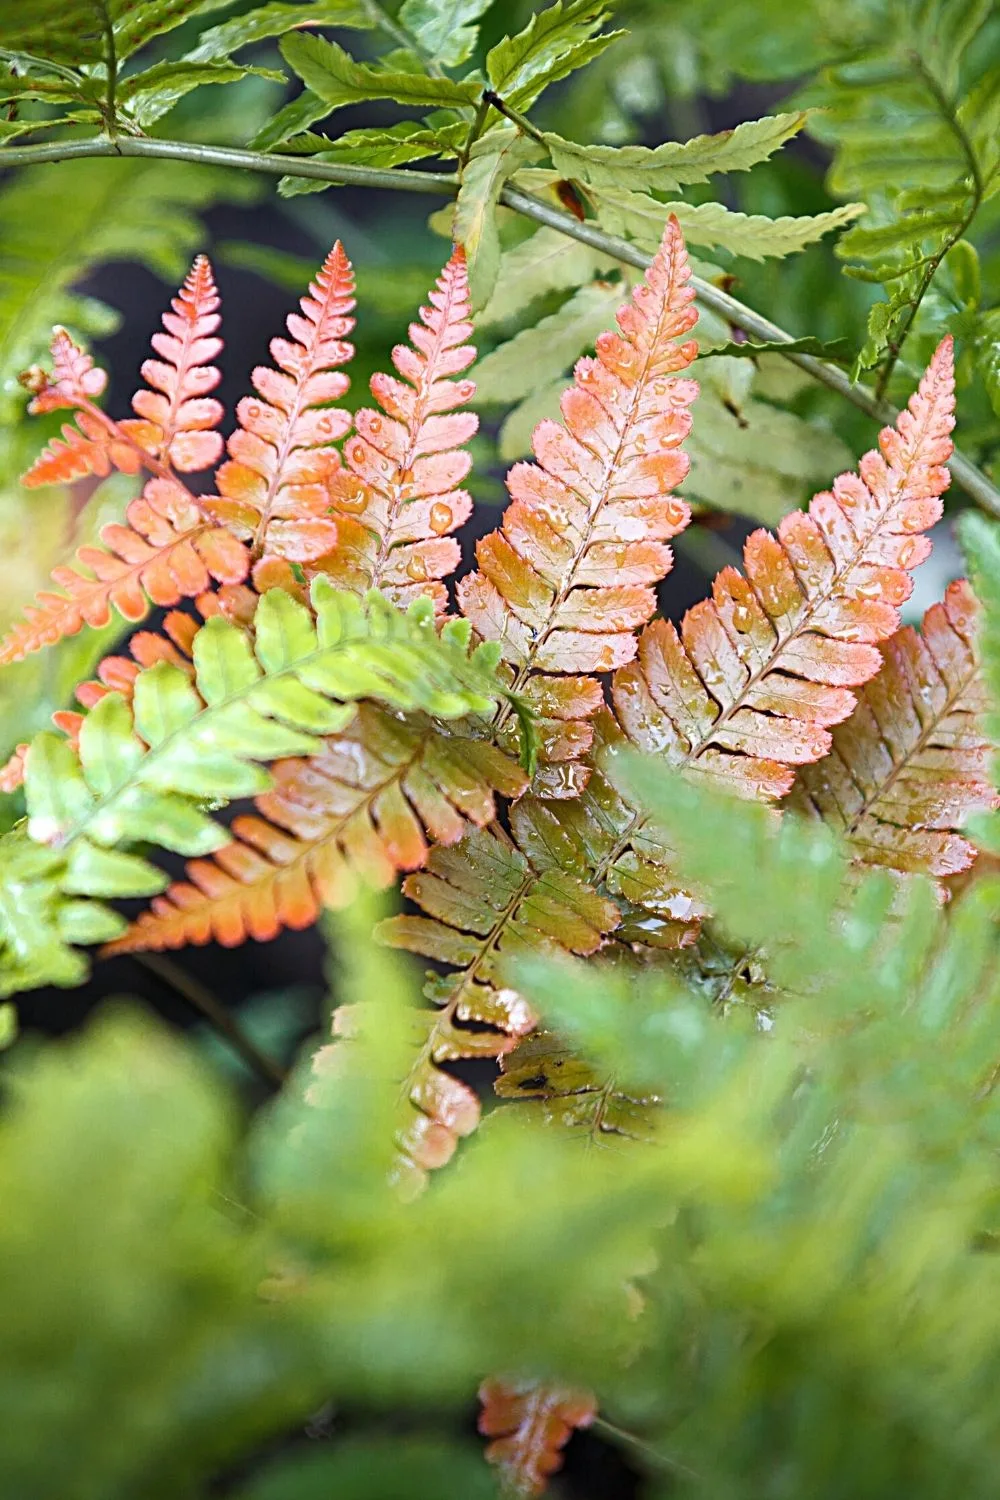 Autumn Fern (Dryopteris Erythrosora) requires a cool environment for it to grow